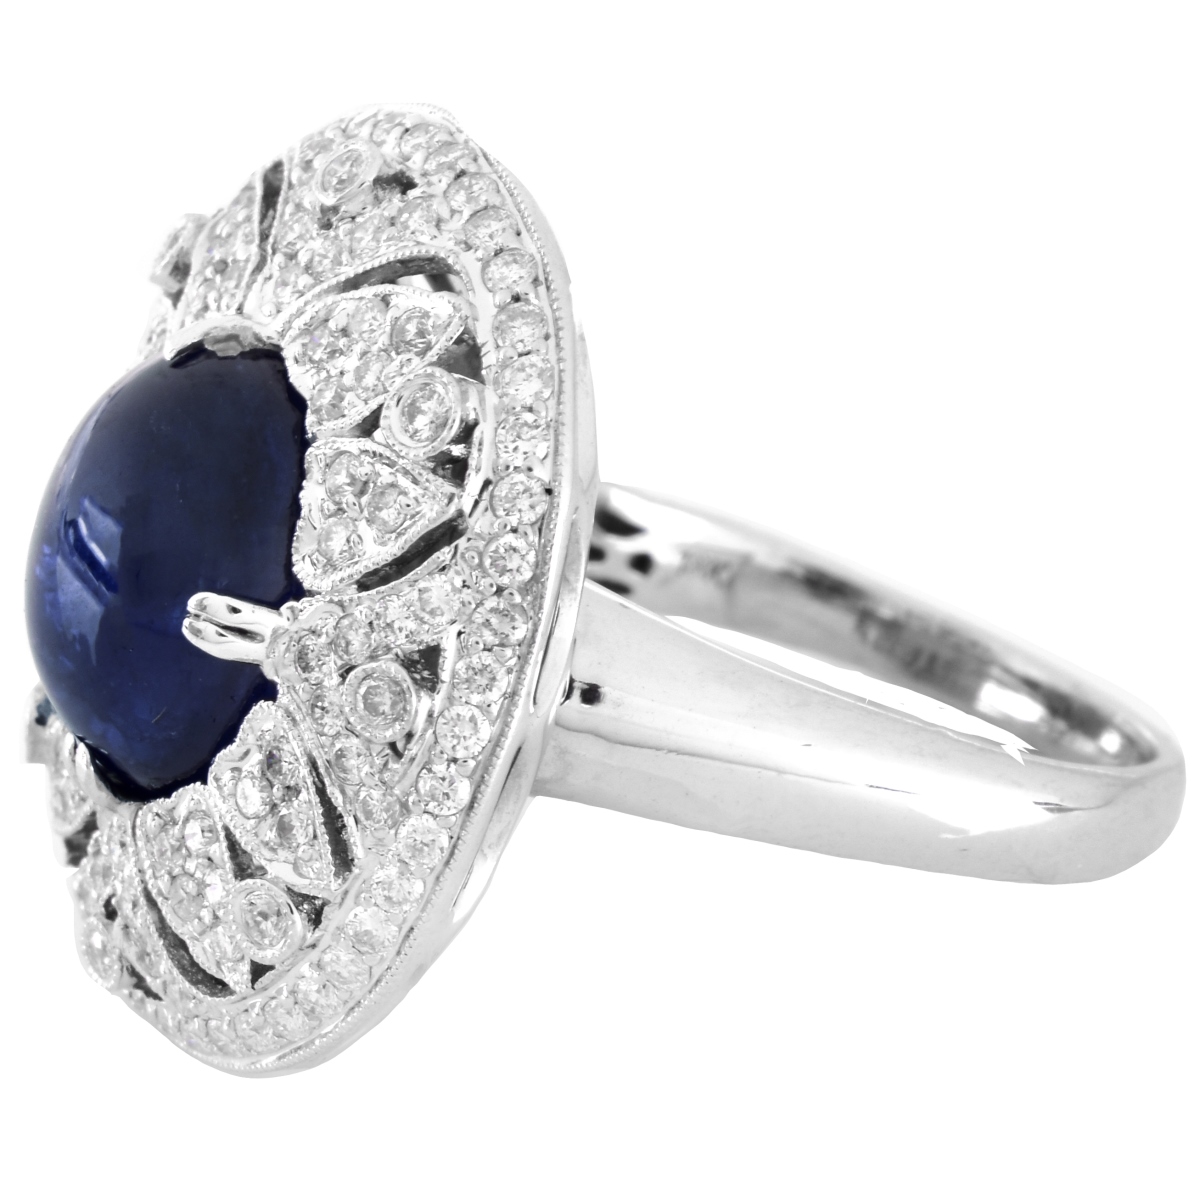 Sapphire, Diamond and 18K Gold Ring